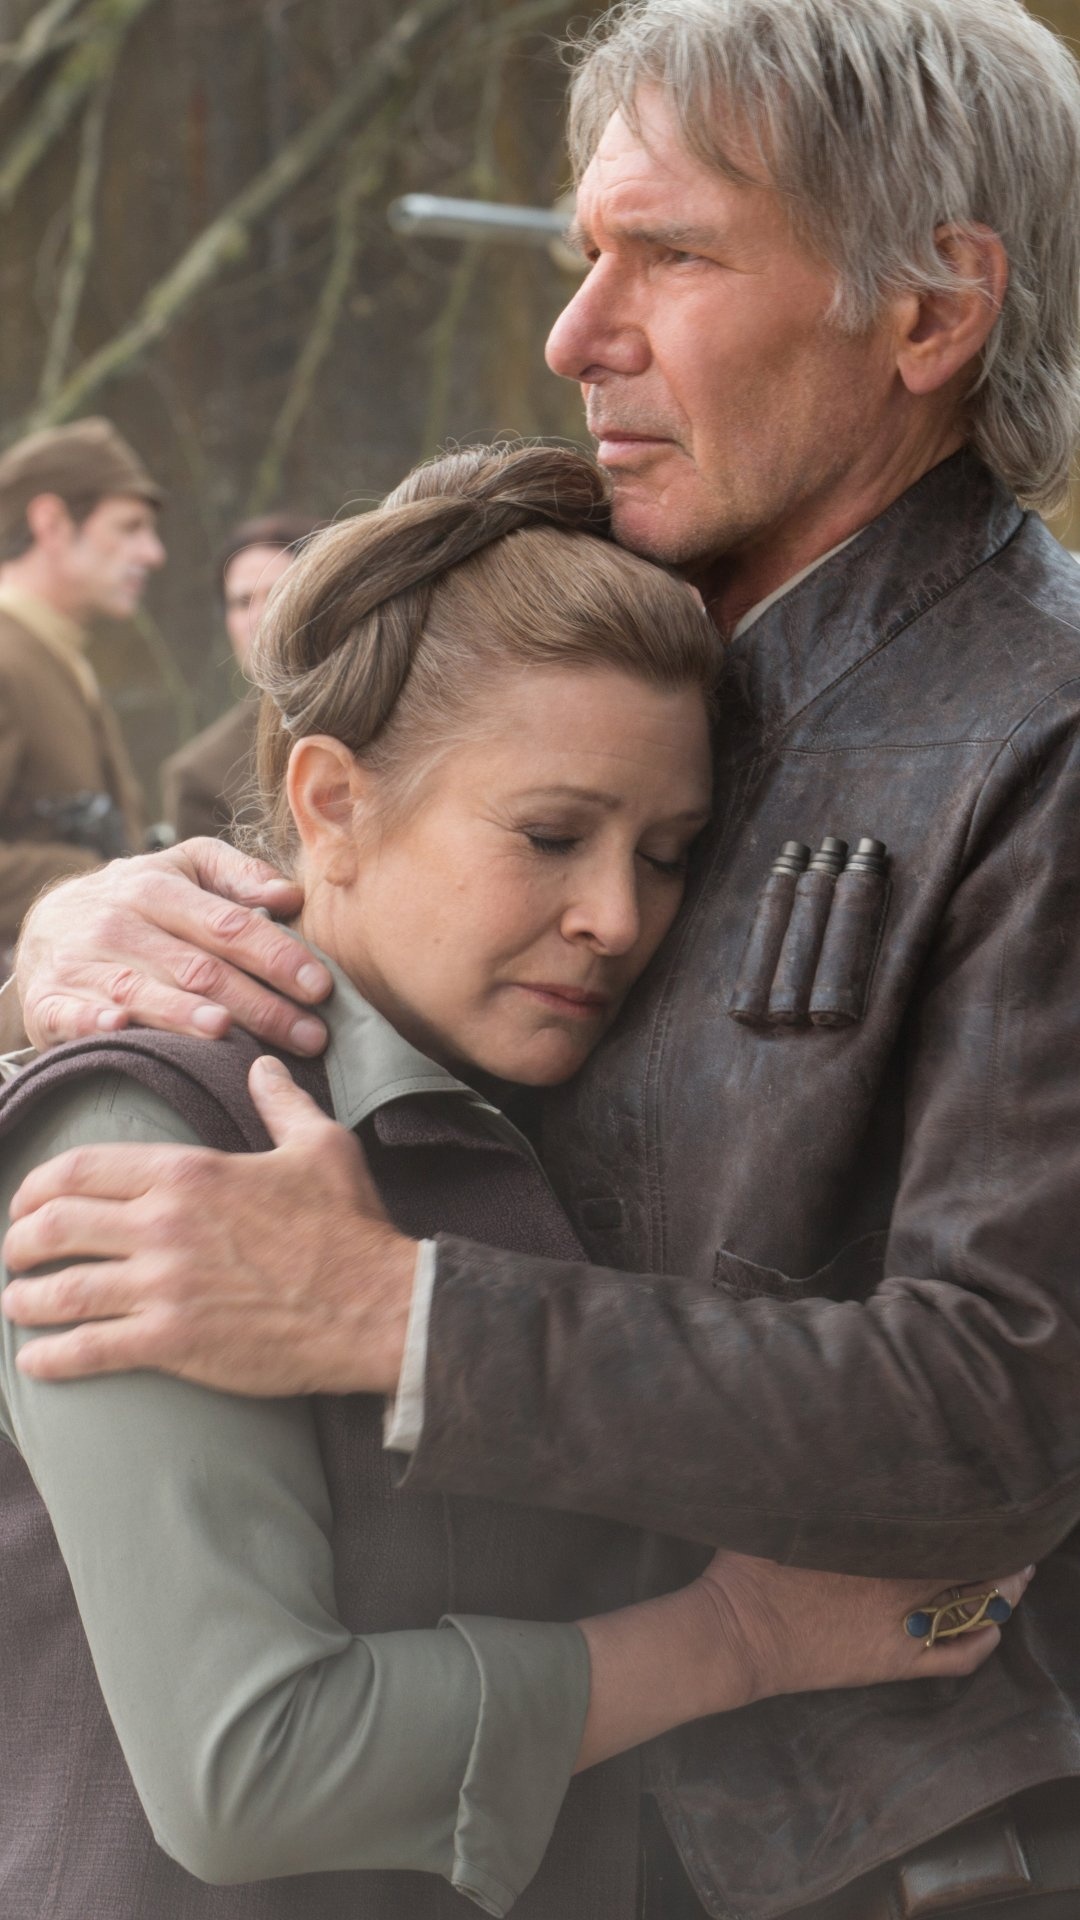 Harrison Ford: Star Wars Episode VII: The Force Awakens, Han Solo and Leia Organa. 1080x1920 Full HD Wallpaper.